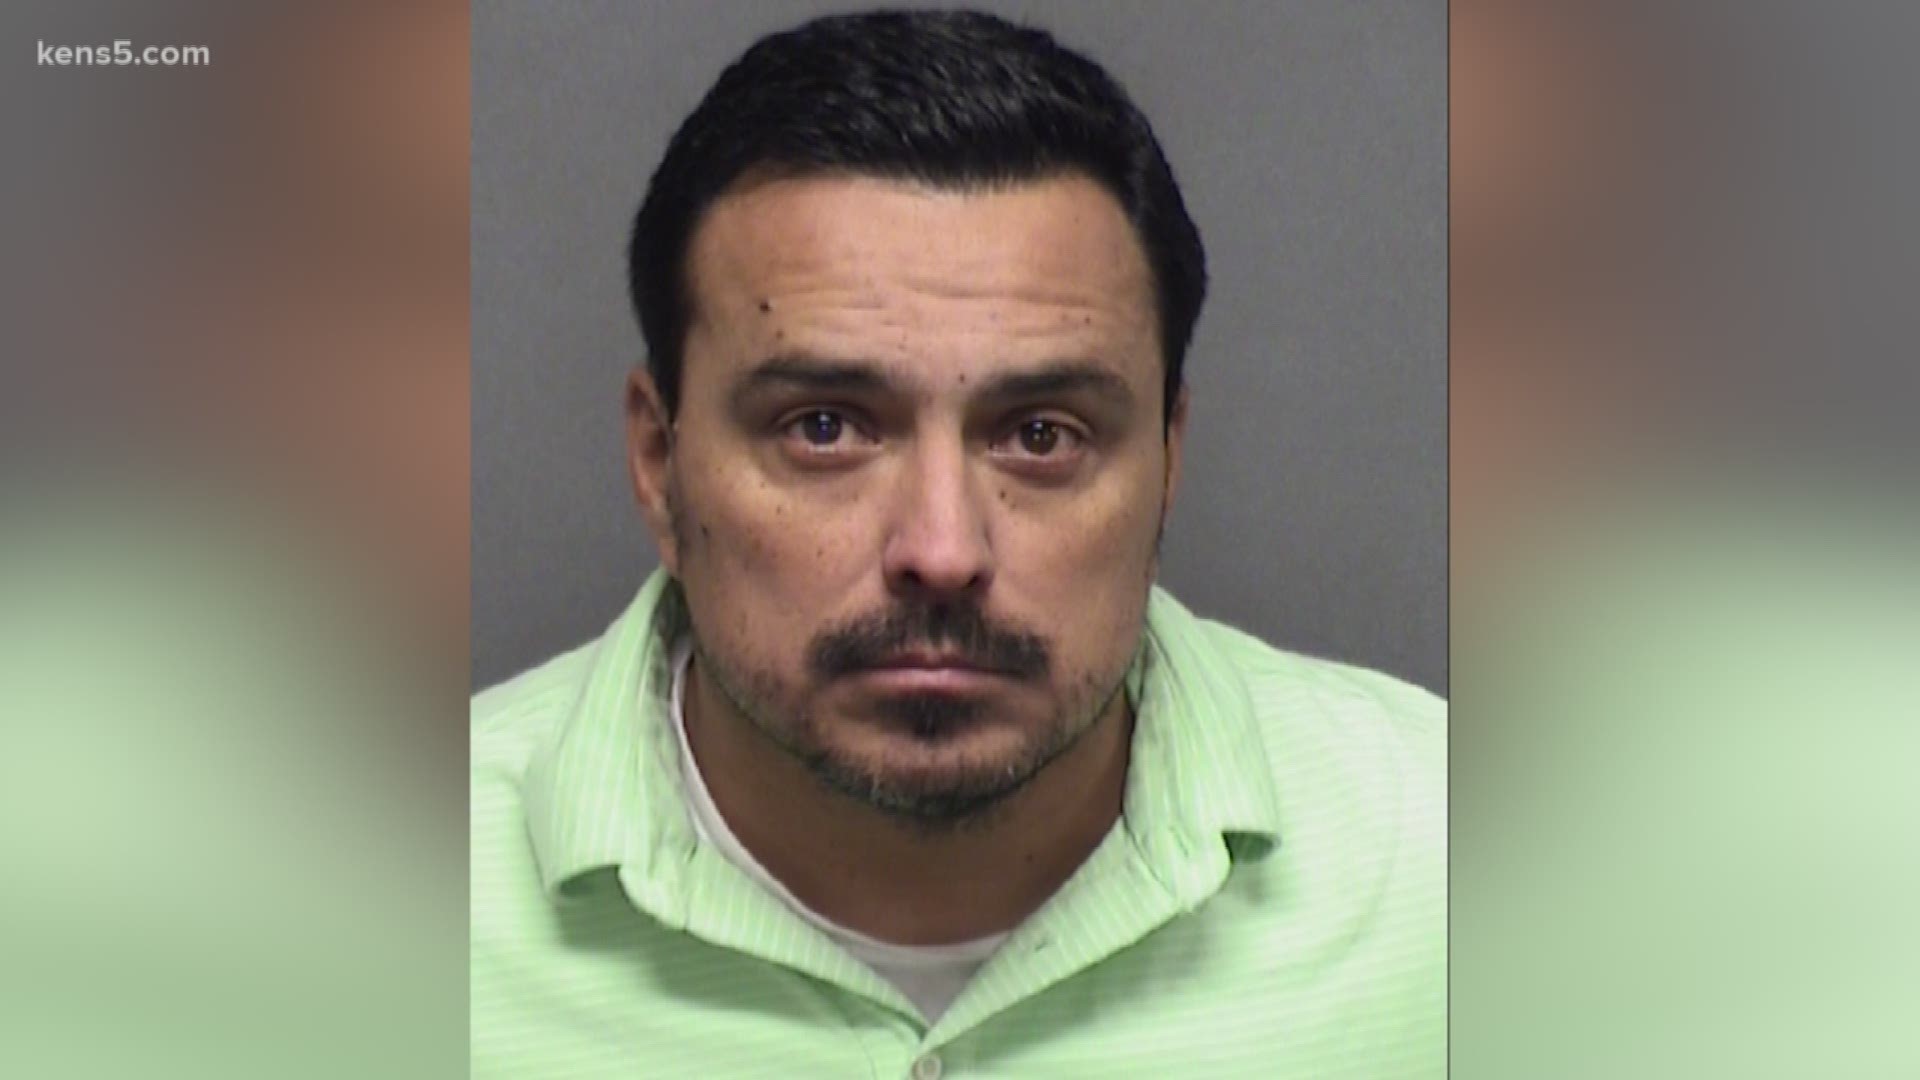 Middle School Student Sex - Teacher arrested at Hondo ISD middle school, accused of having sex with  student | kens5.com